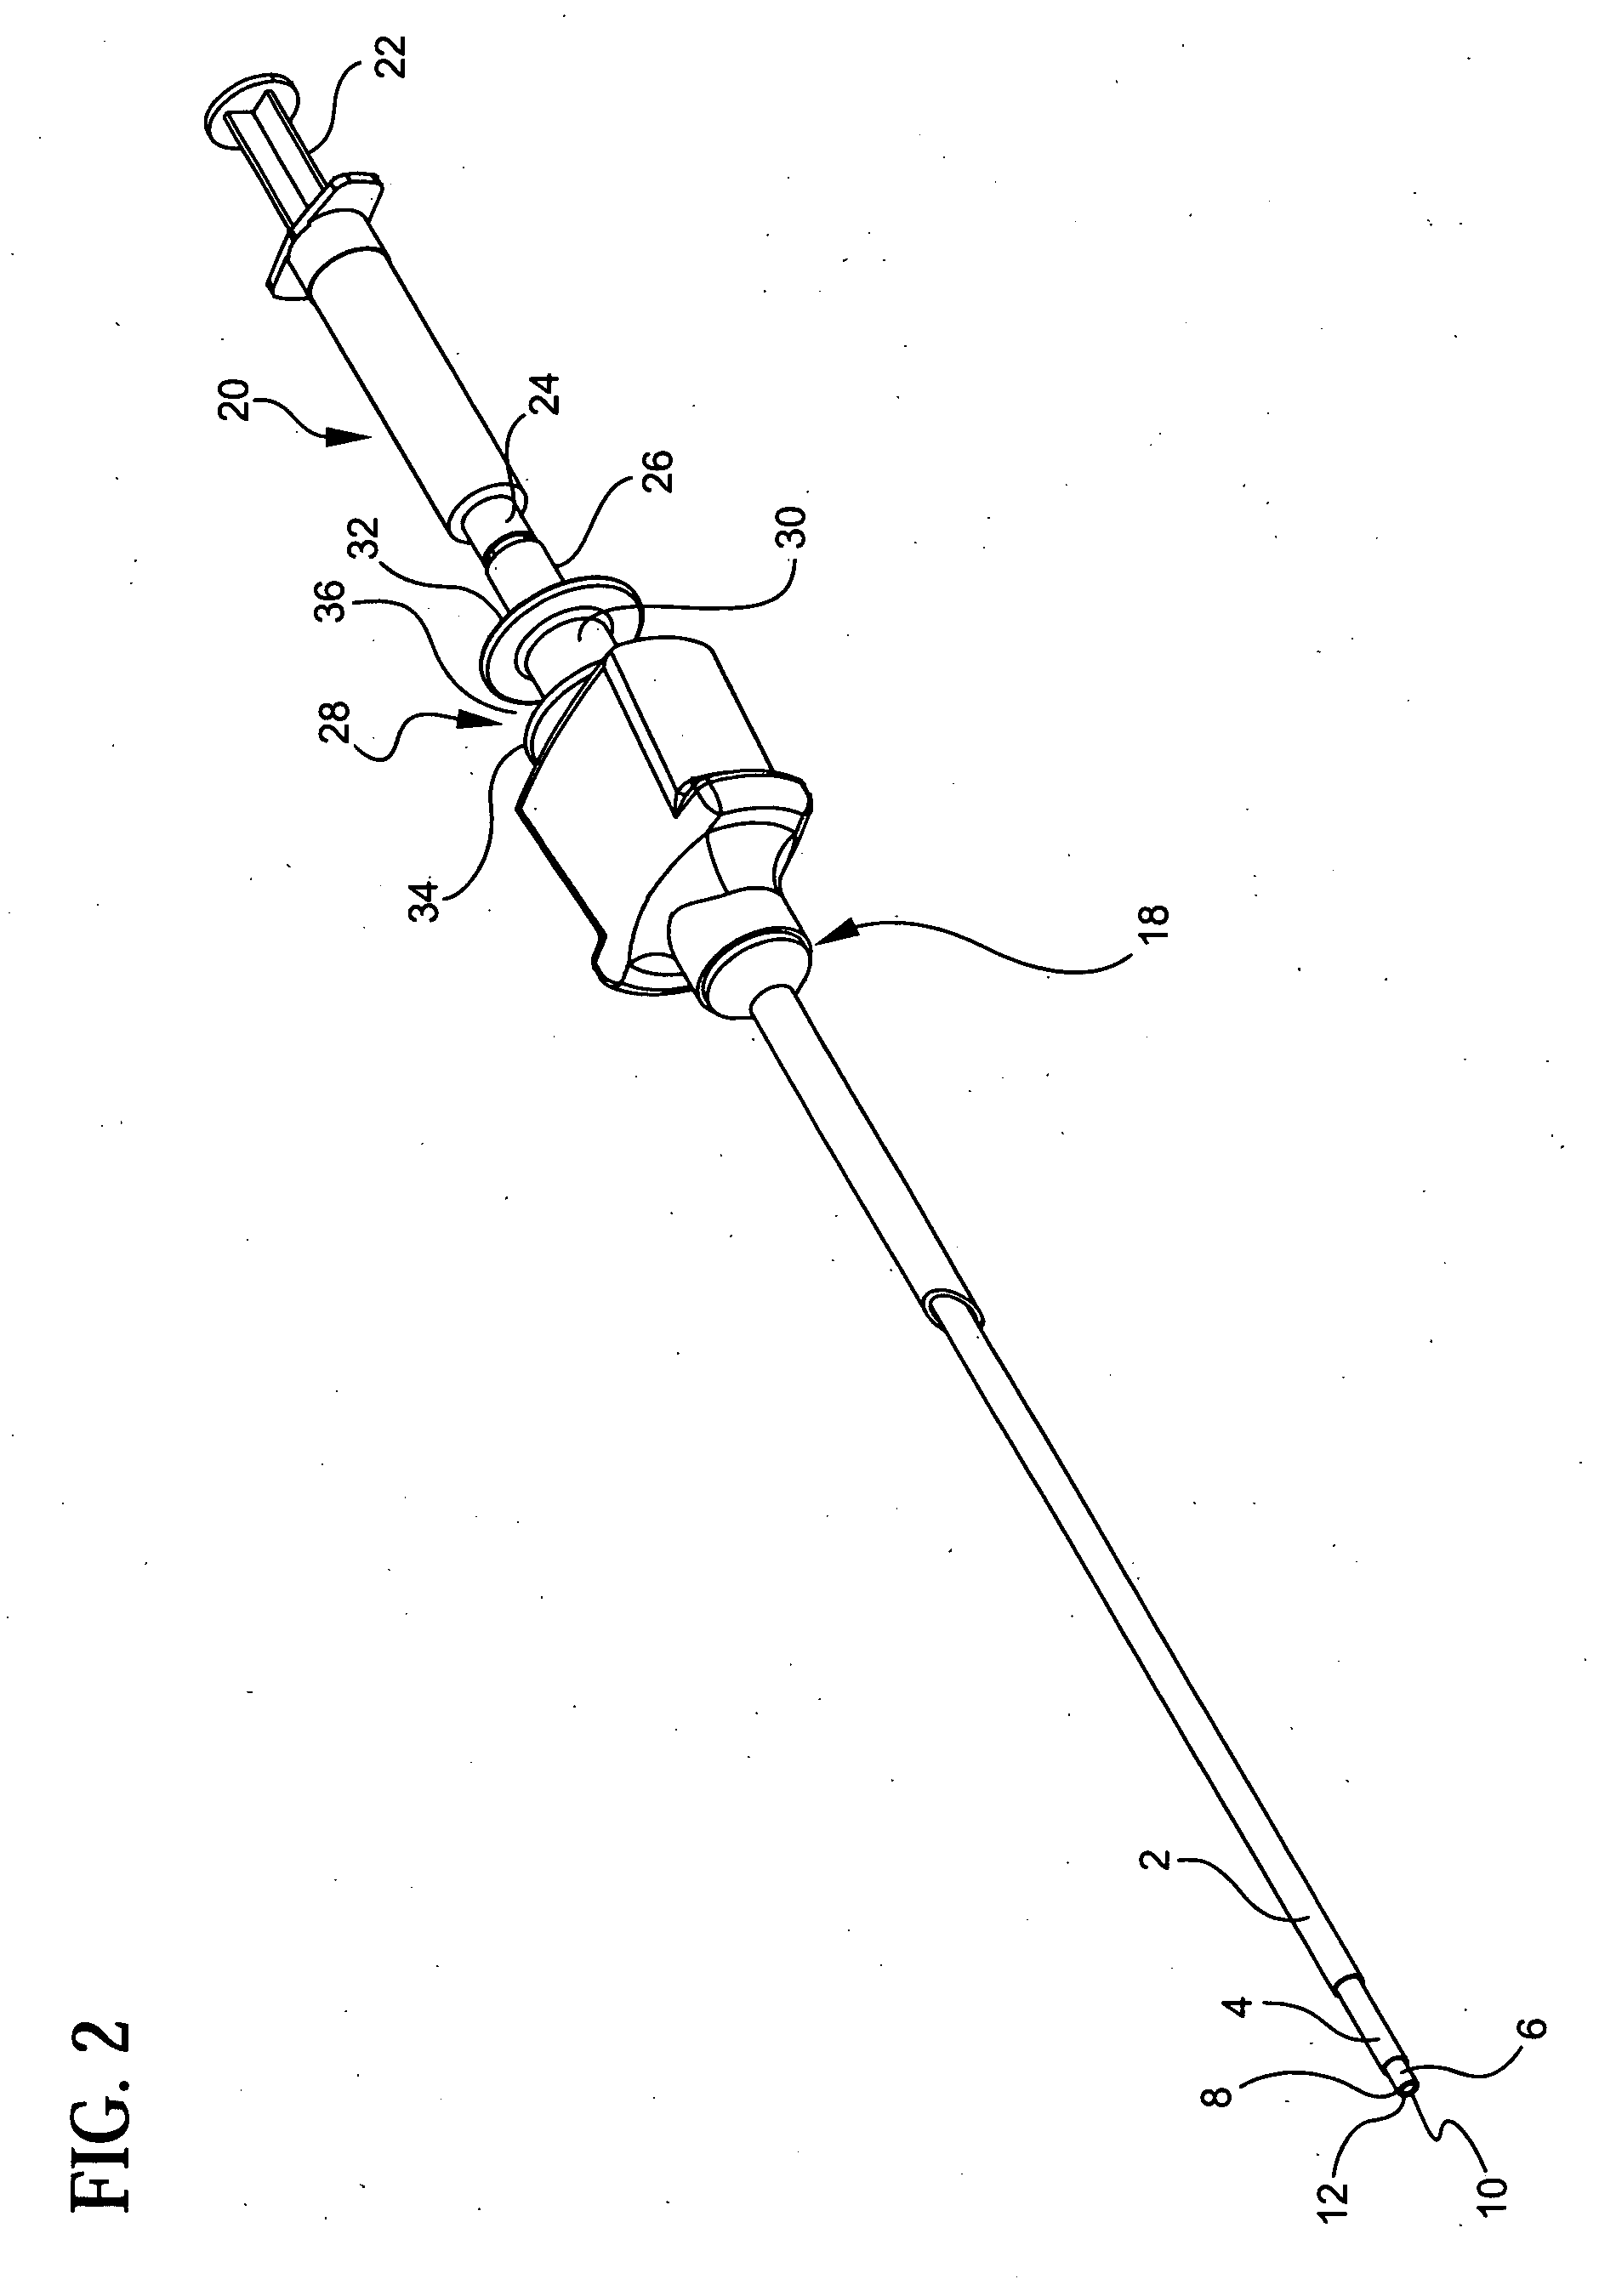 Articulating laparoscopic device and method for delivery of medical fluid